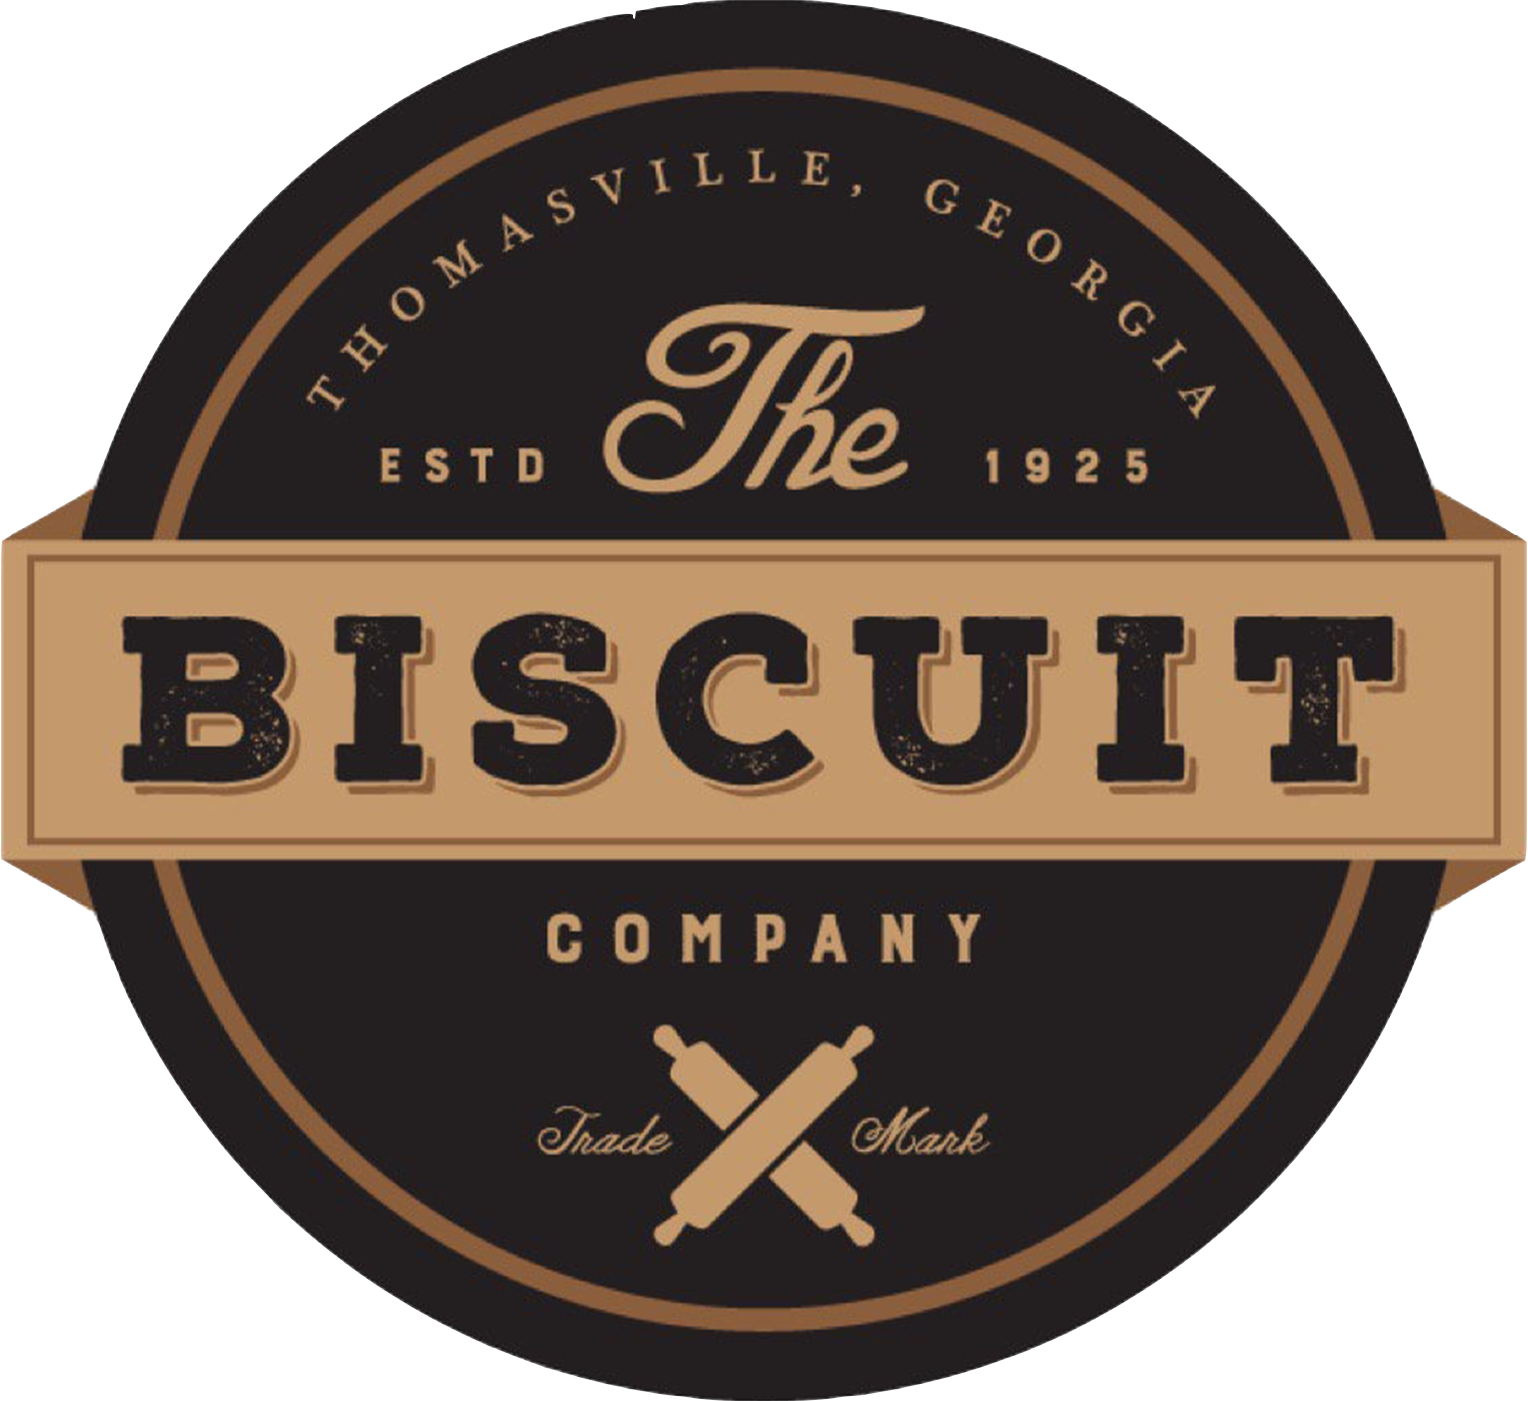 The Biscuit Company